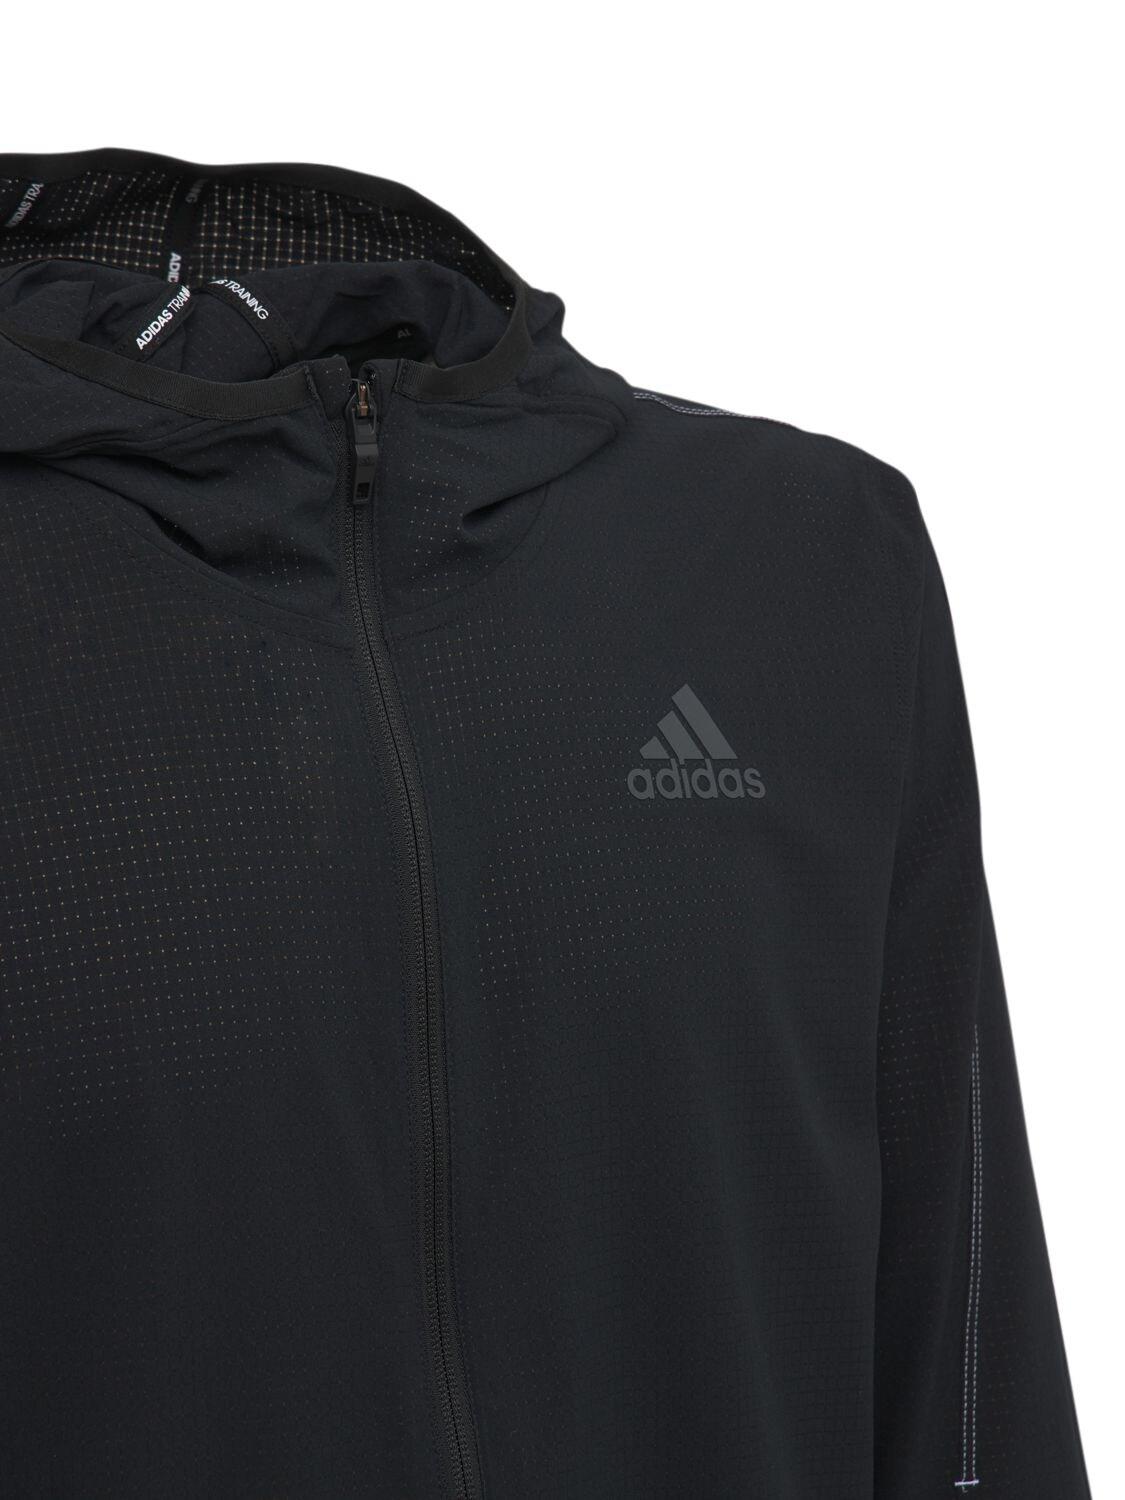 adidas Originals H.rdy Warri Hooded Jacket in Black for Men - Save 2% |  Lyst Canada